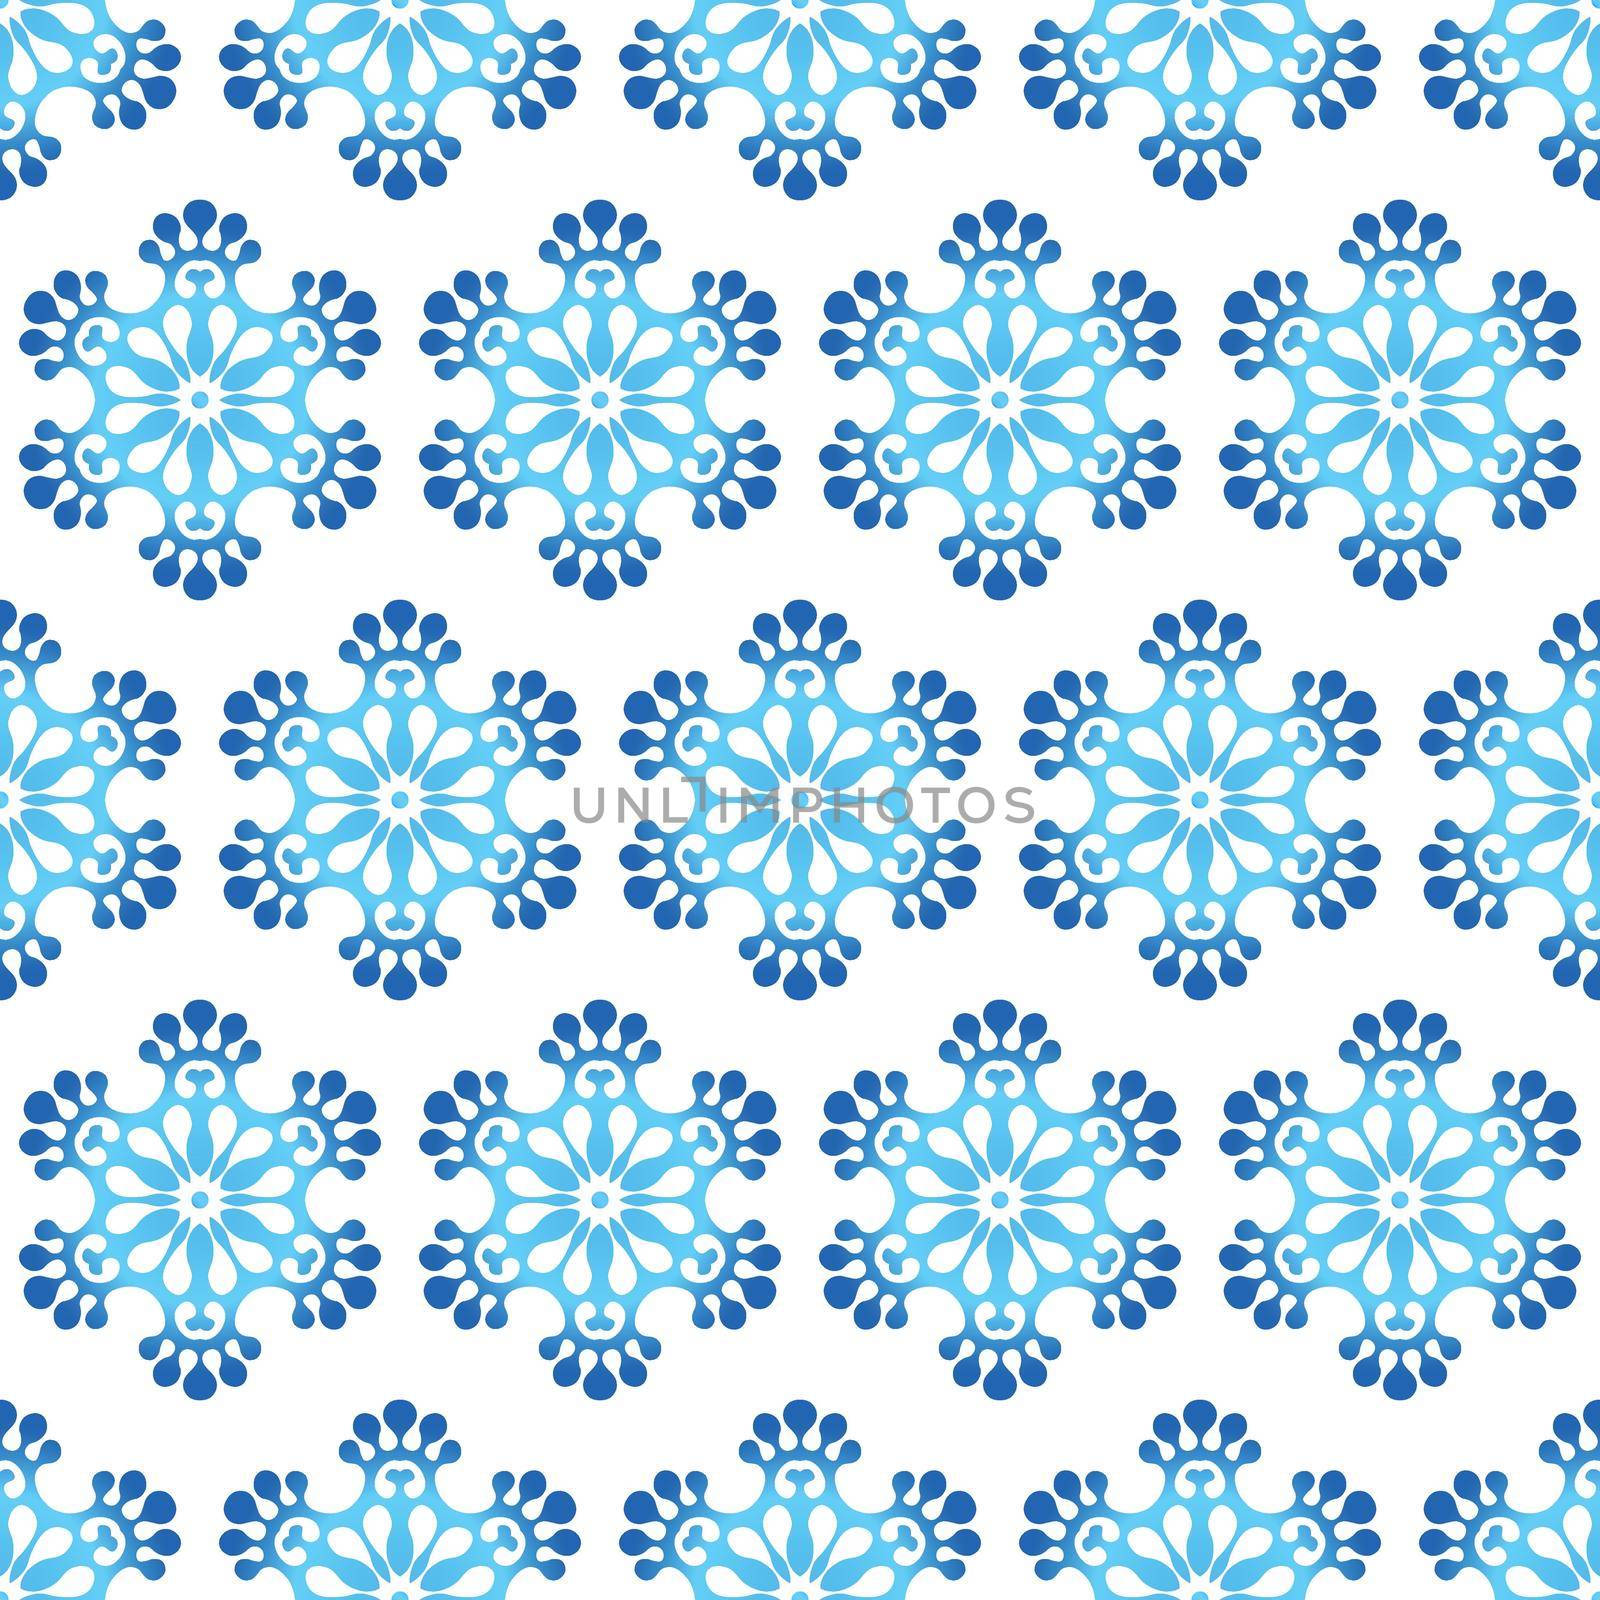 Winter seamless pattern with blue gradient snowflakes on white background. Vector illustration for fabric, textile wallpaper, posters, gift wrapping paper. Christmas vector illustration by allaku